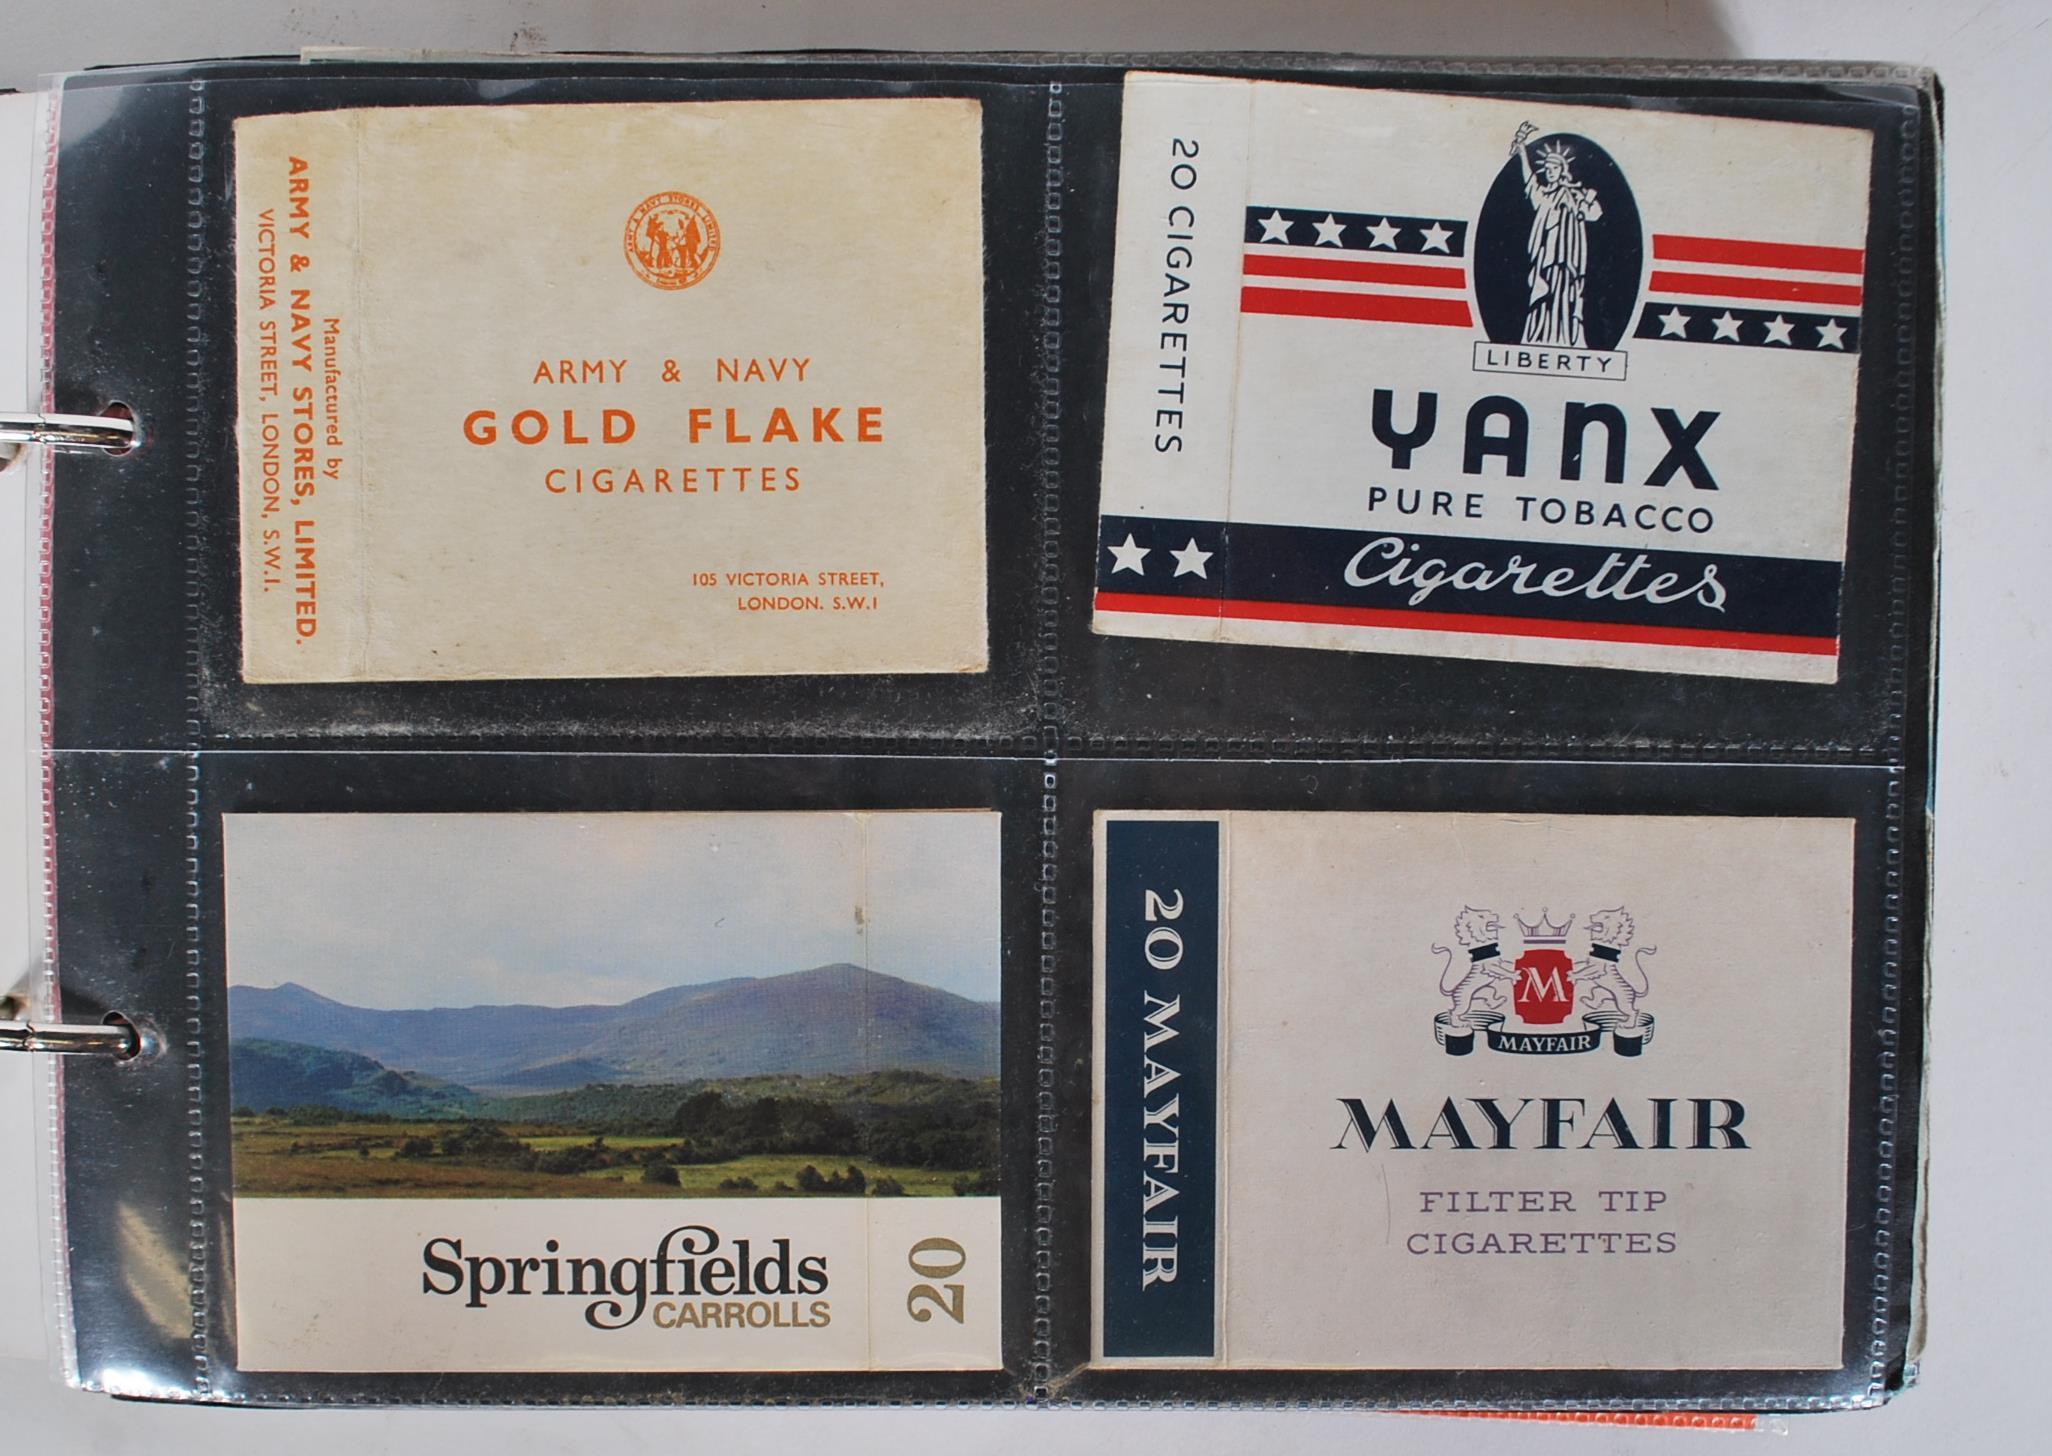 A collection of vintage 20th Century Cigarette packets within plastic sleeves containing many - Image 8 of 13